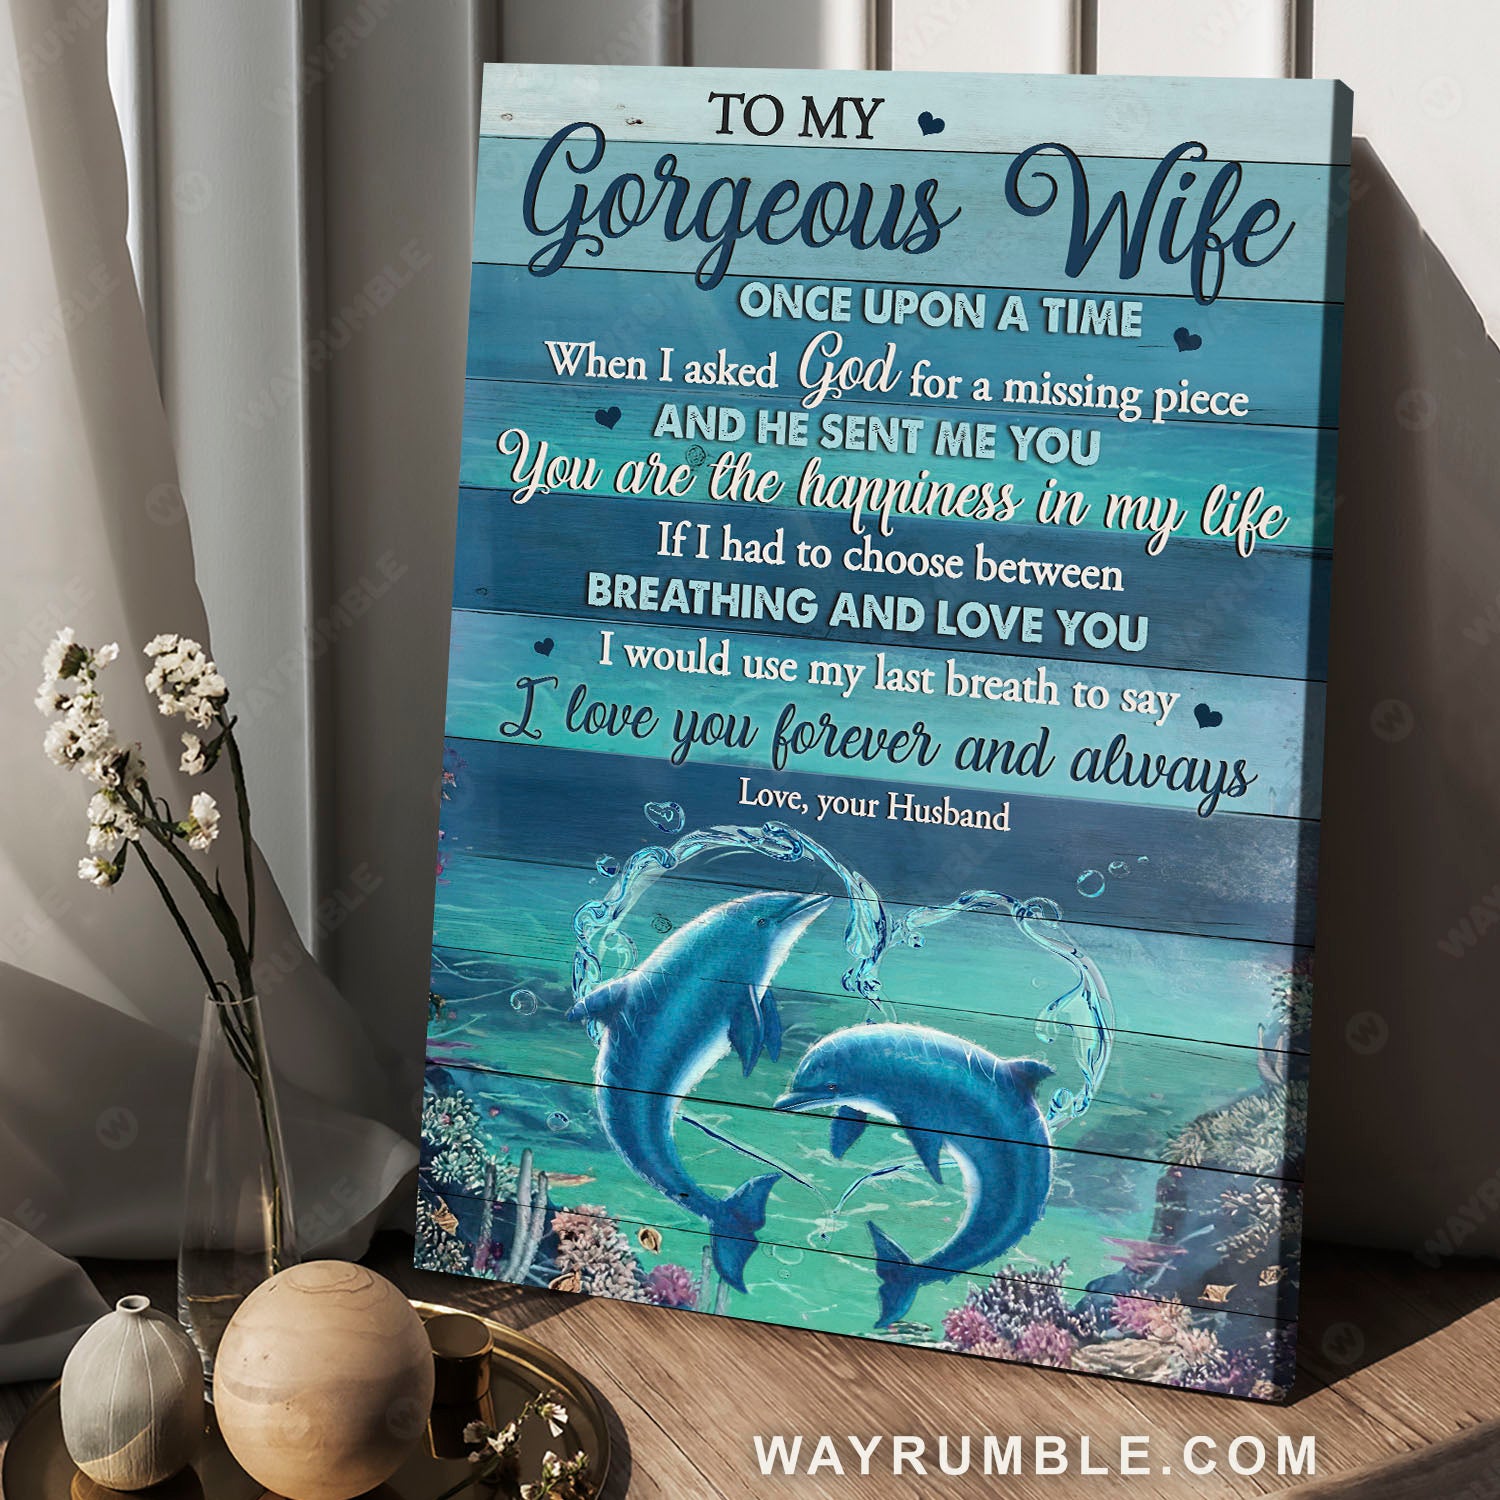 To my wife, Blue dolphin, Heart shape, Blue ocean, I love you forever and always - Family Portrait Canvas Prints, Wall Art